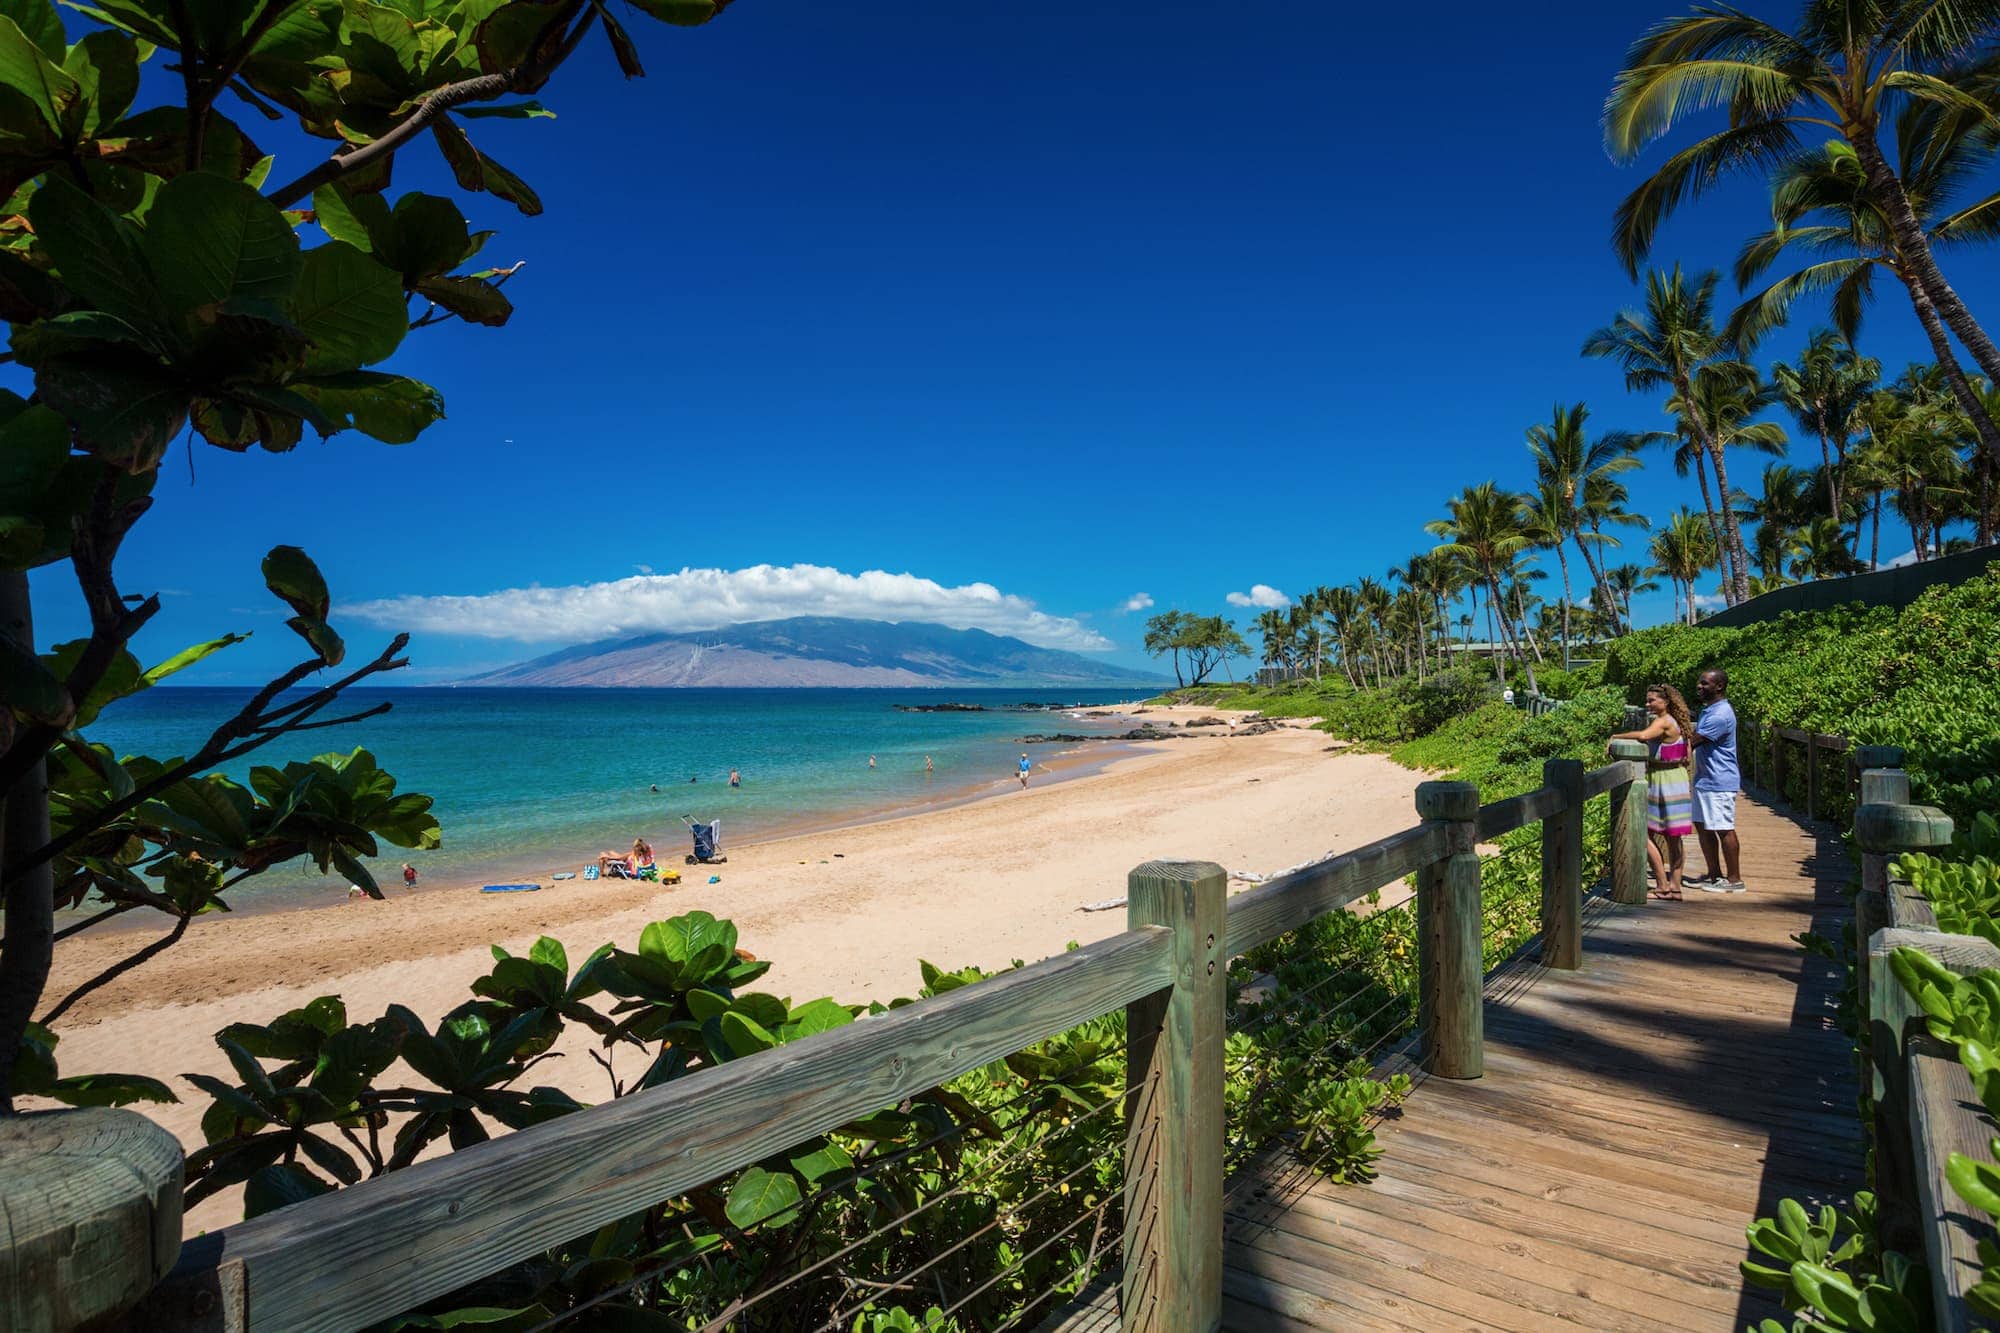 8 Magical Days on Maui a GREAT Itinerary for FirstTime Visitors